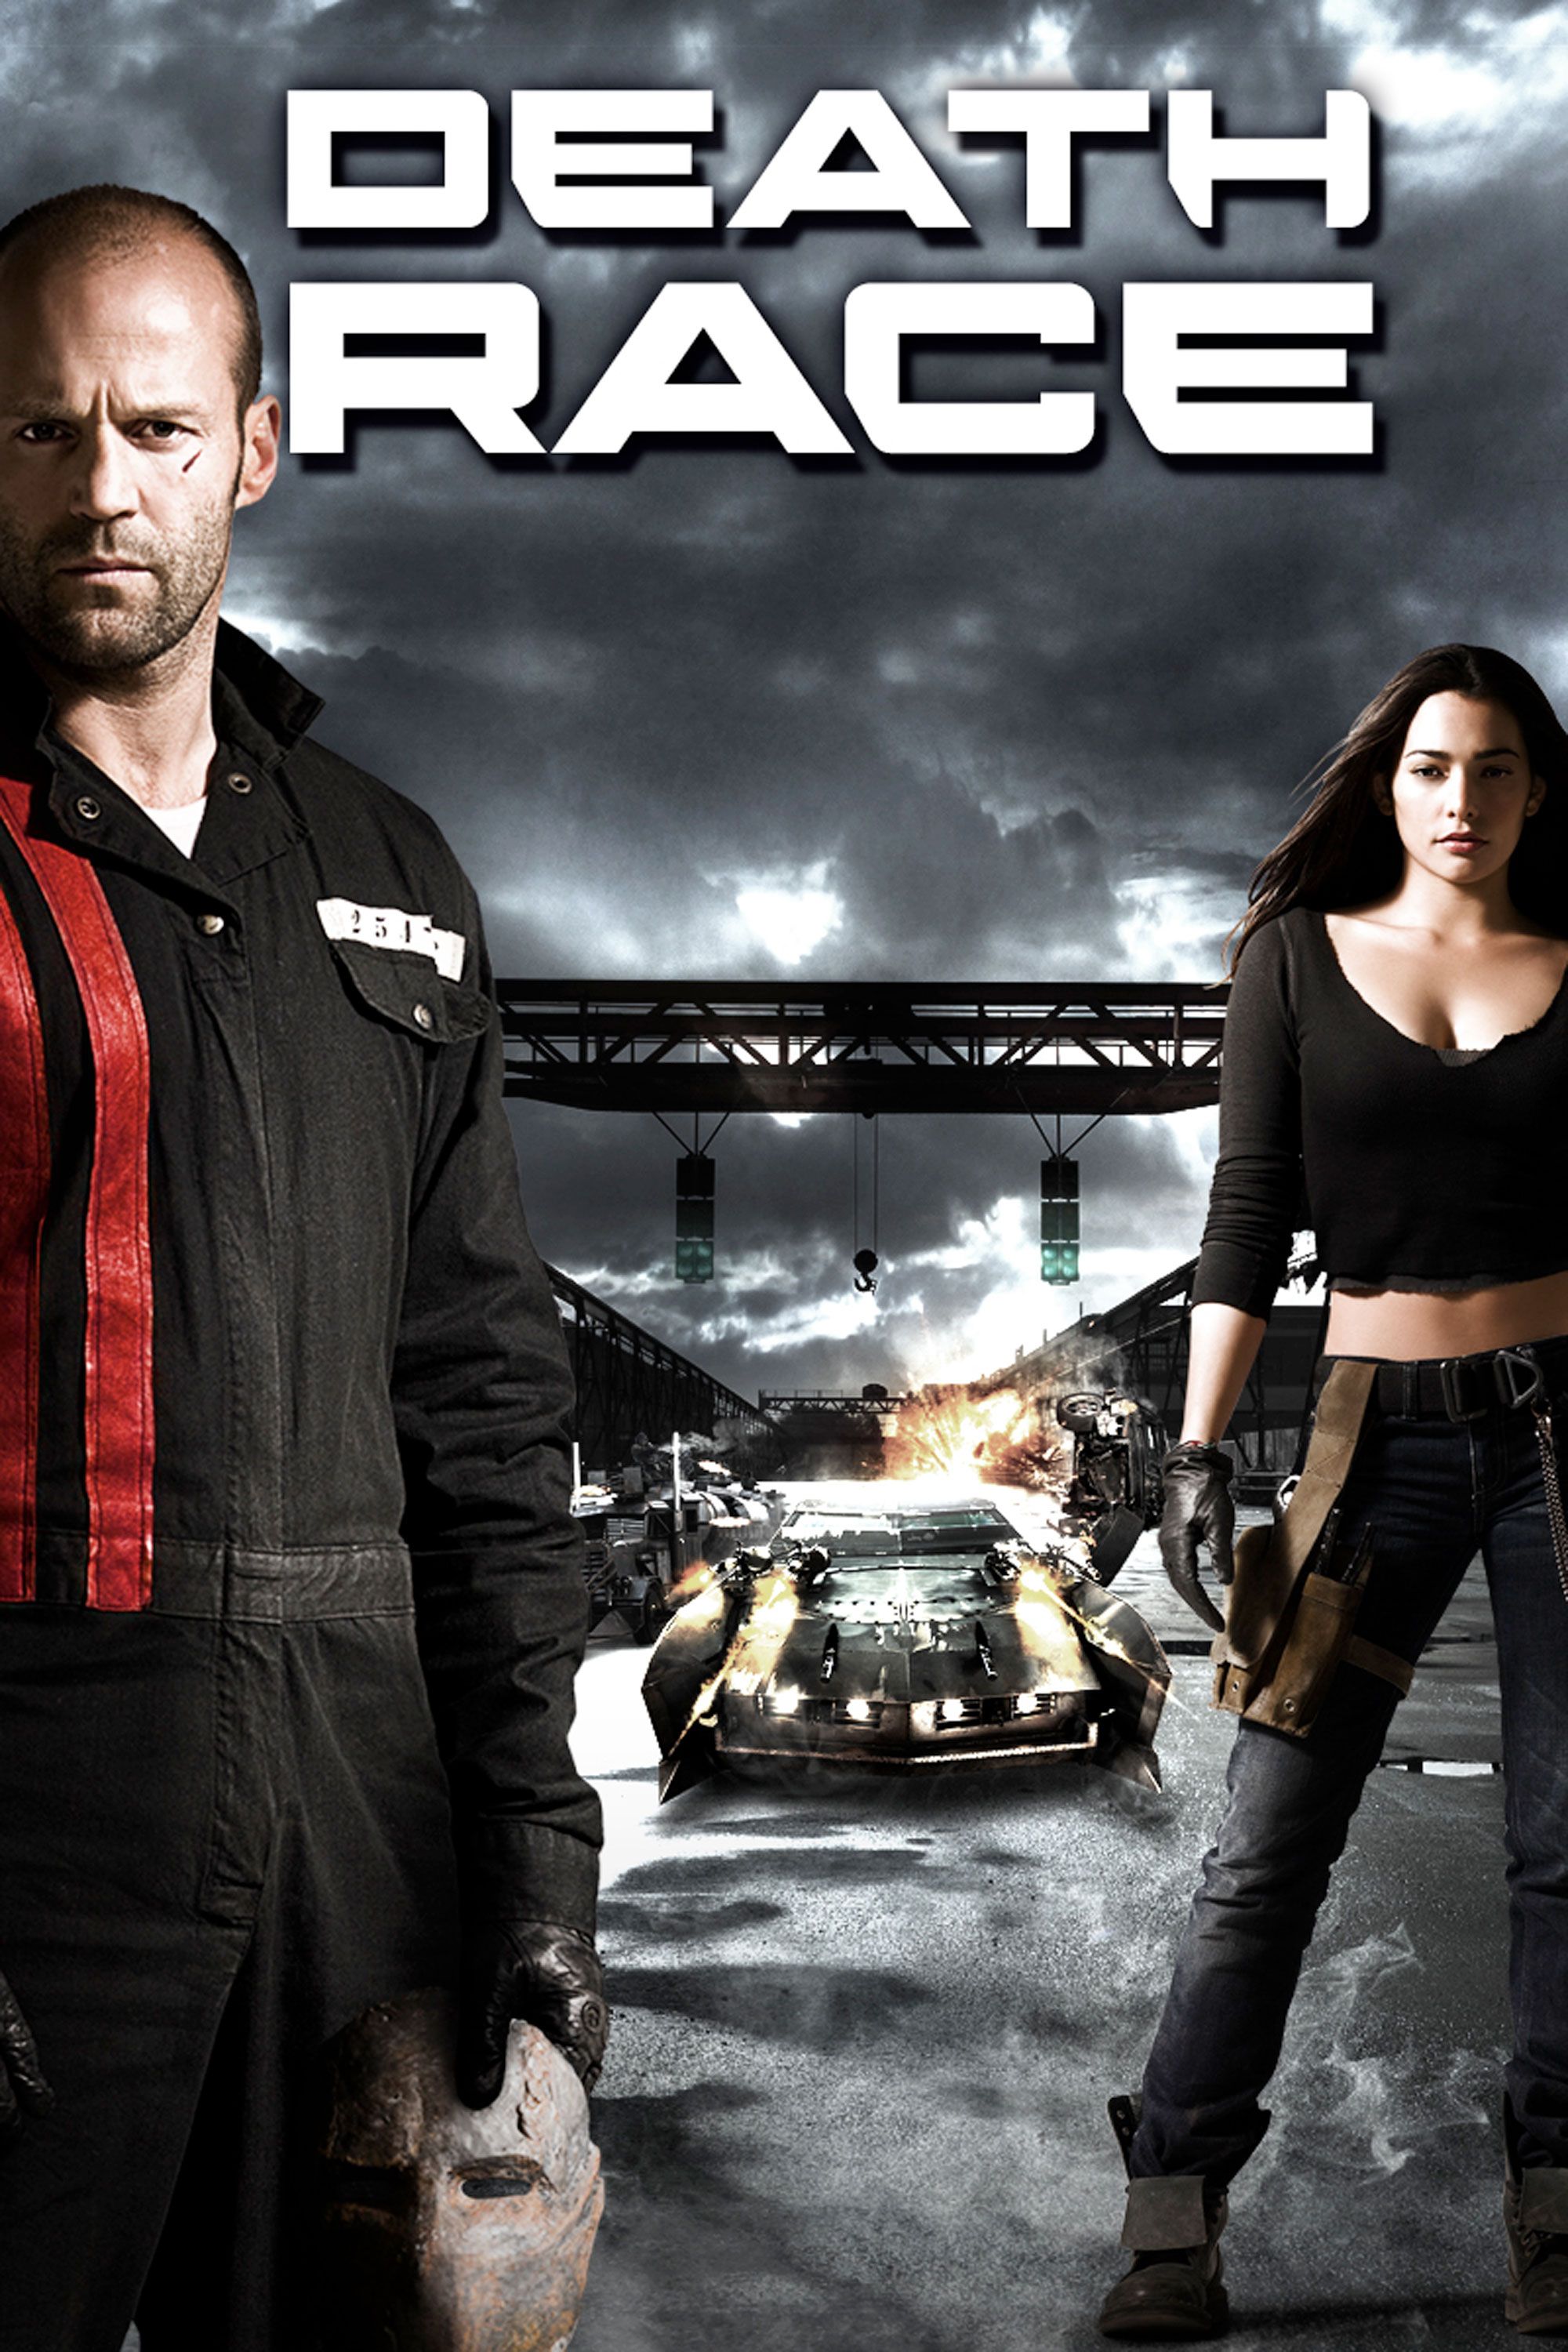 avis richardson recommends death race full movie online free pic